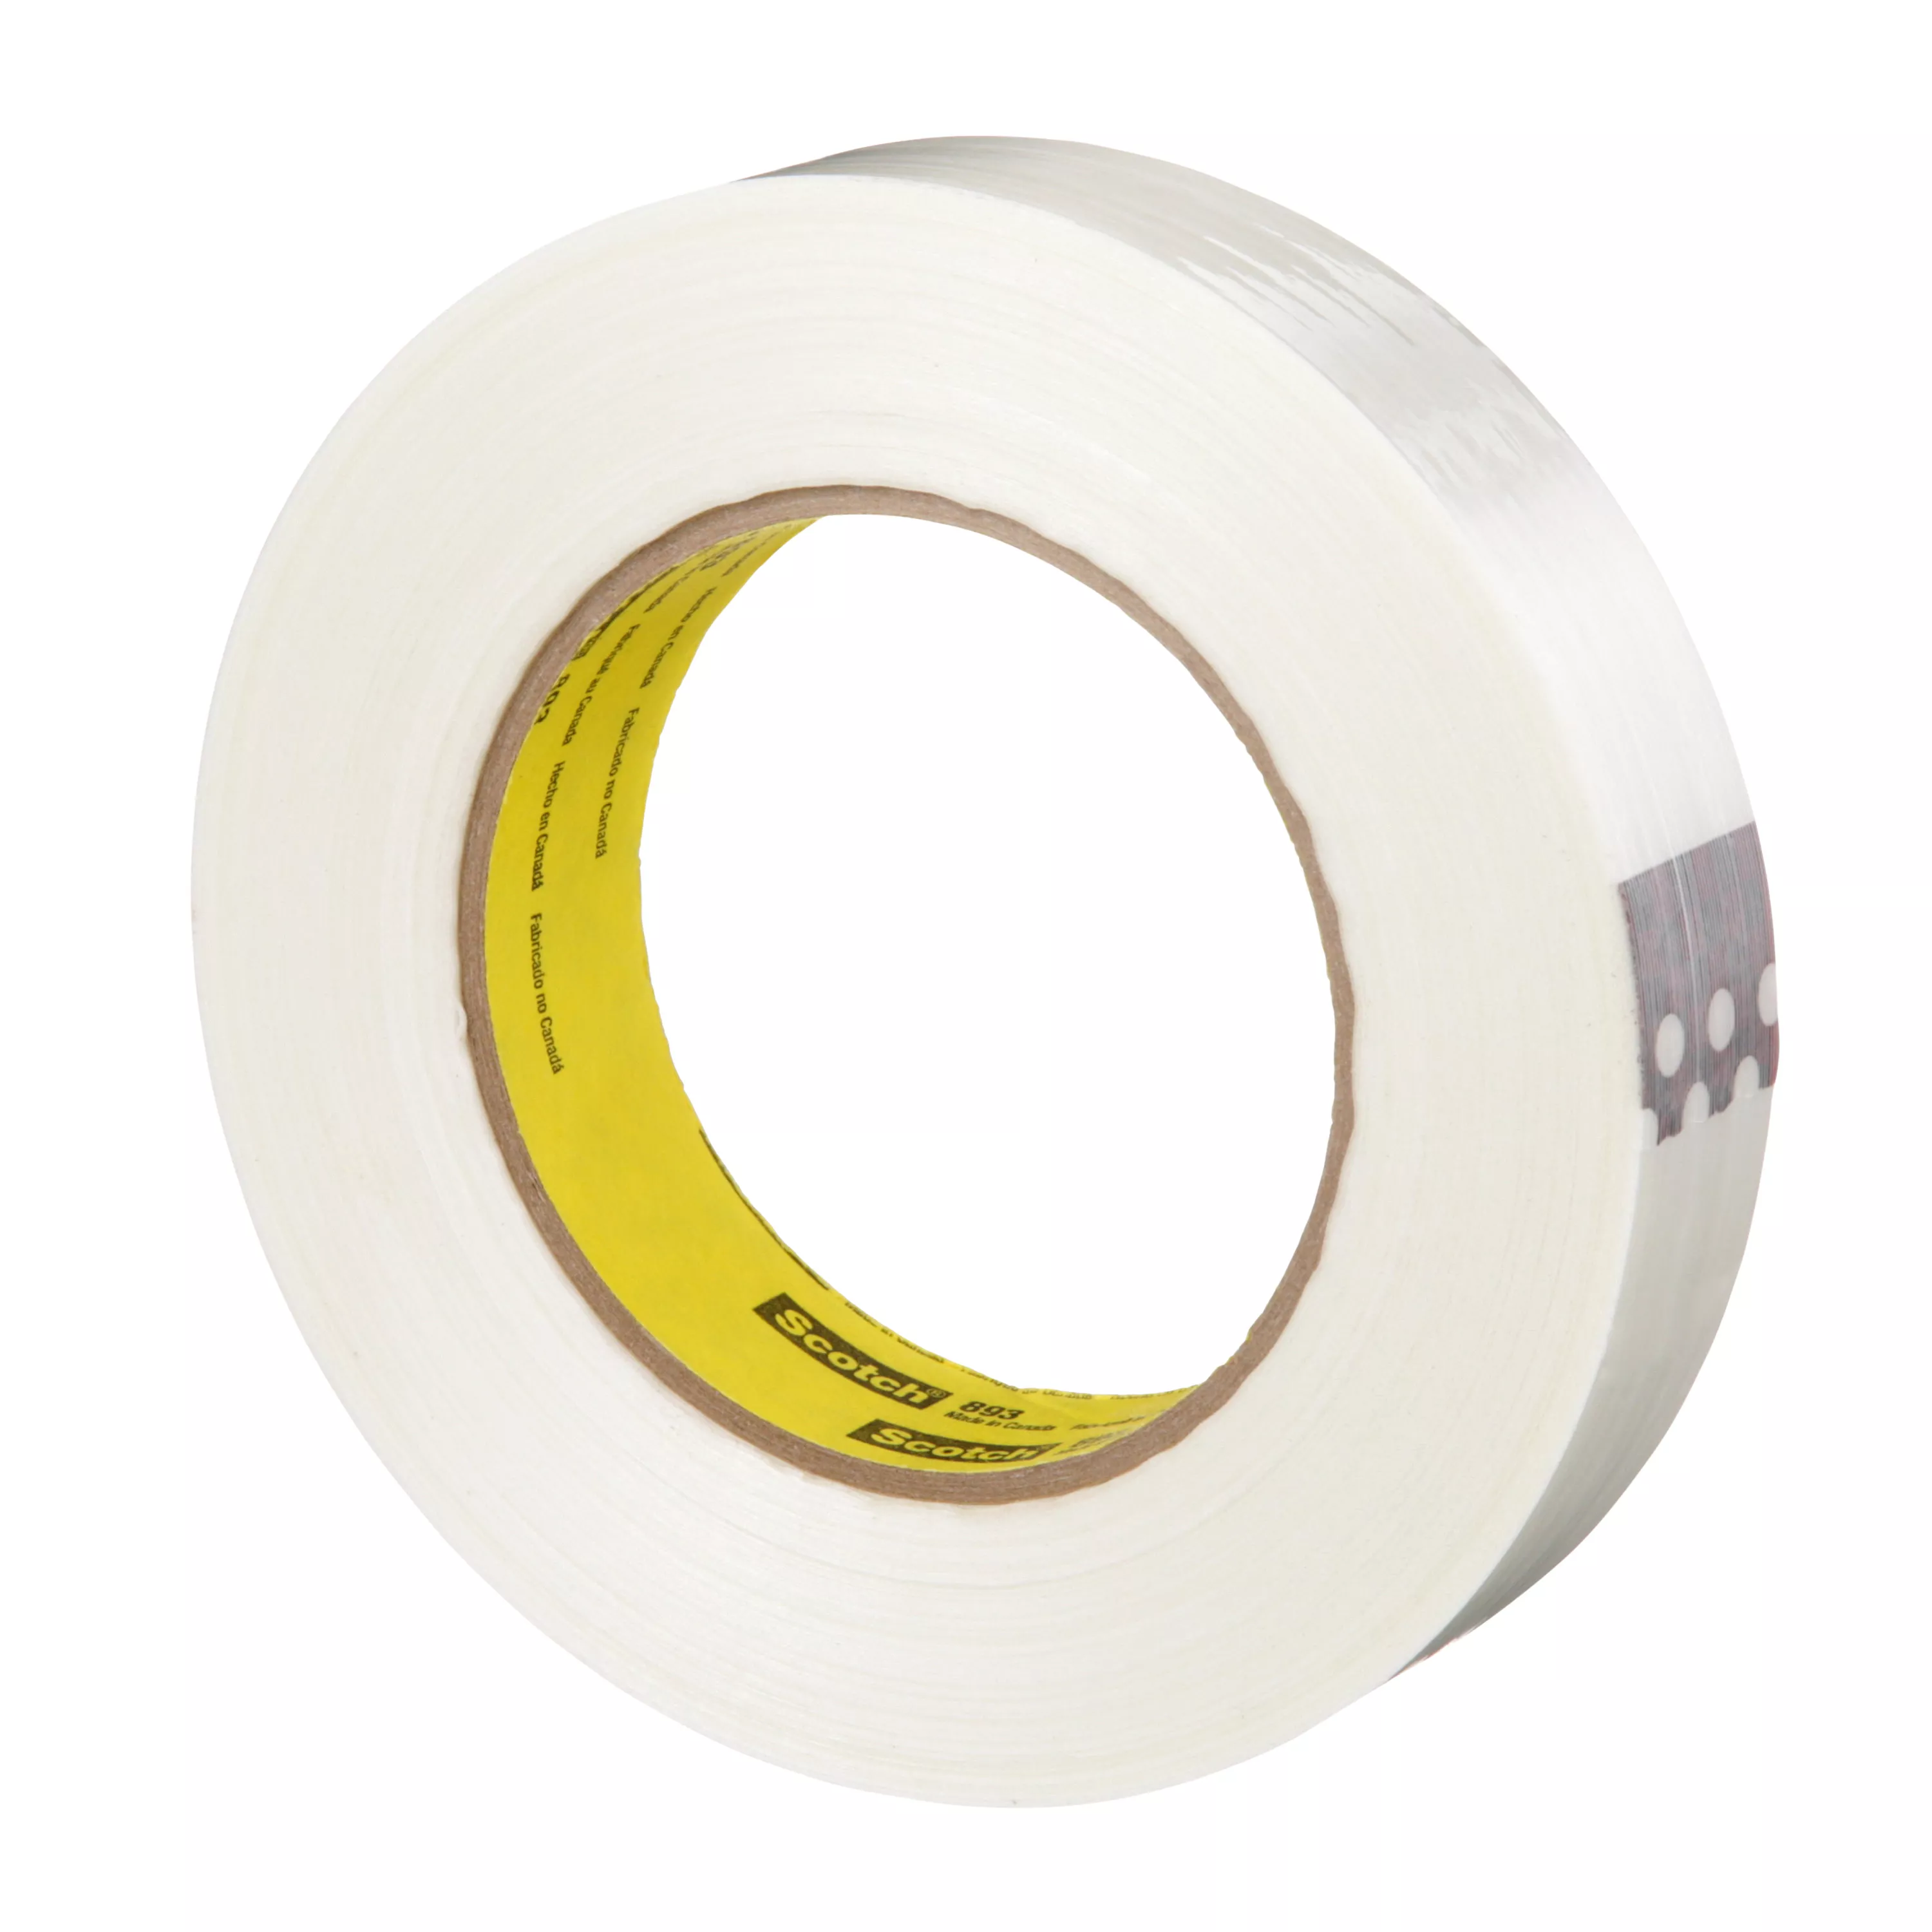 Product Number 893 | Scotch® Filament Tape 893